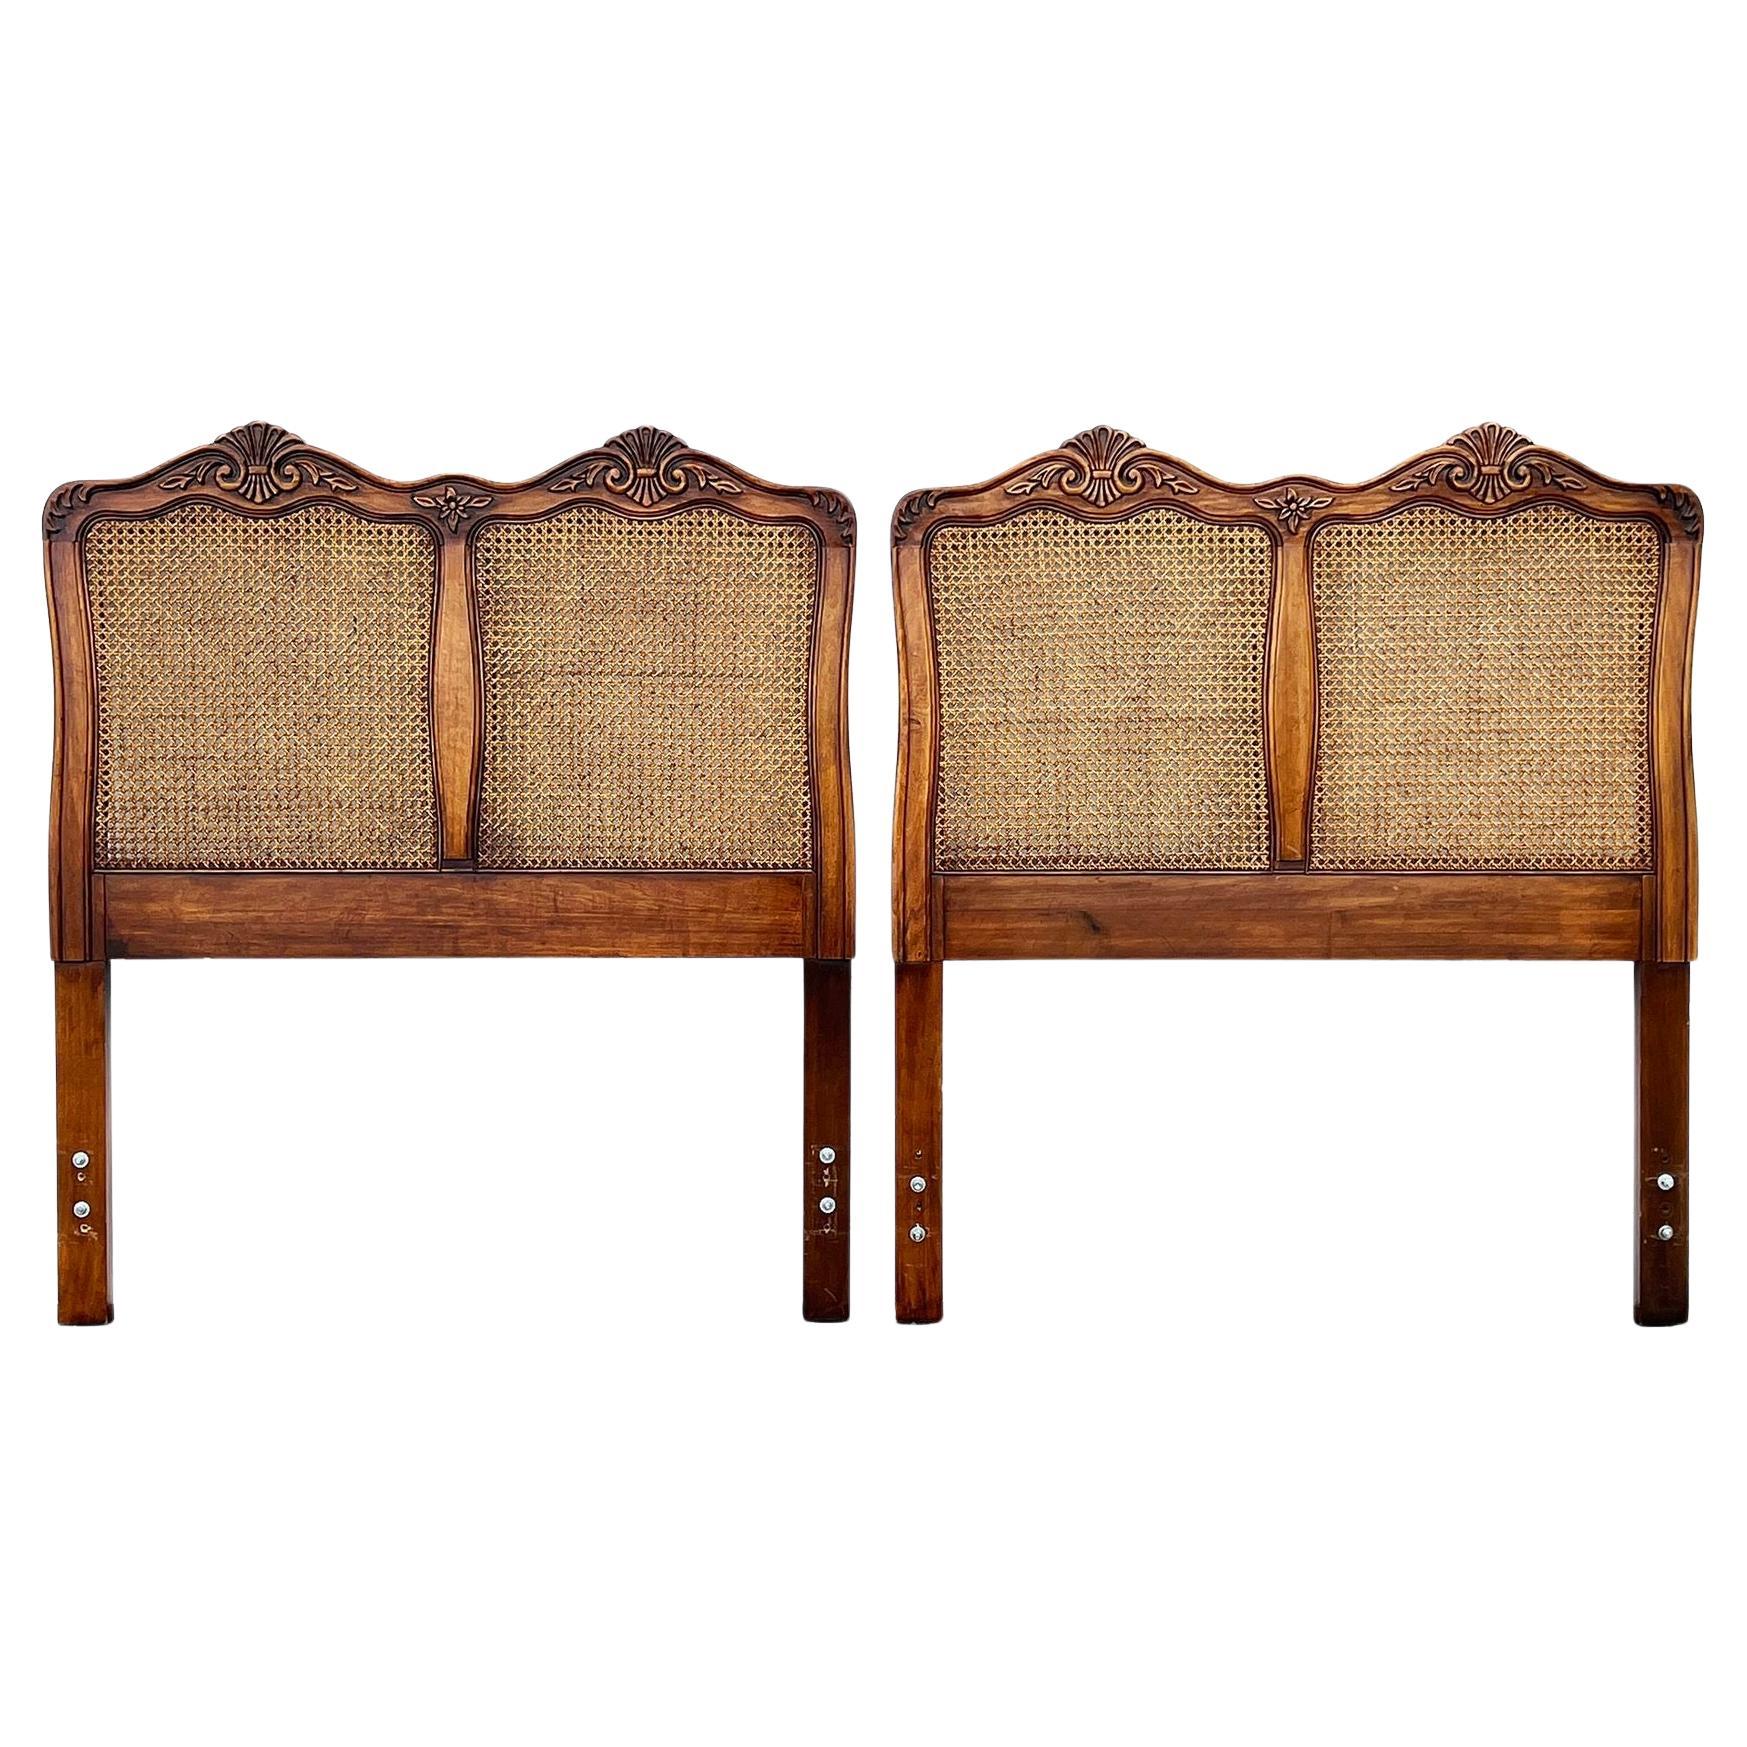 French Provincial Twin Headboards in Walnut and Caning attr. Henredon, pair For Sale